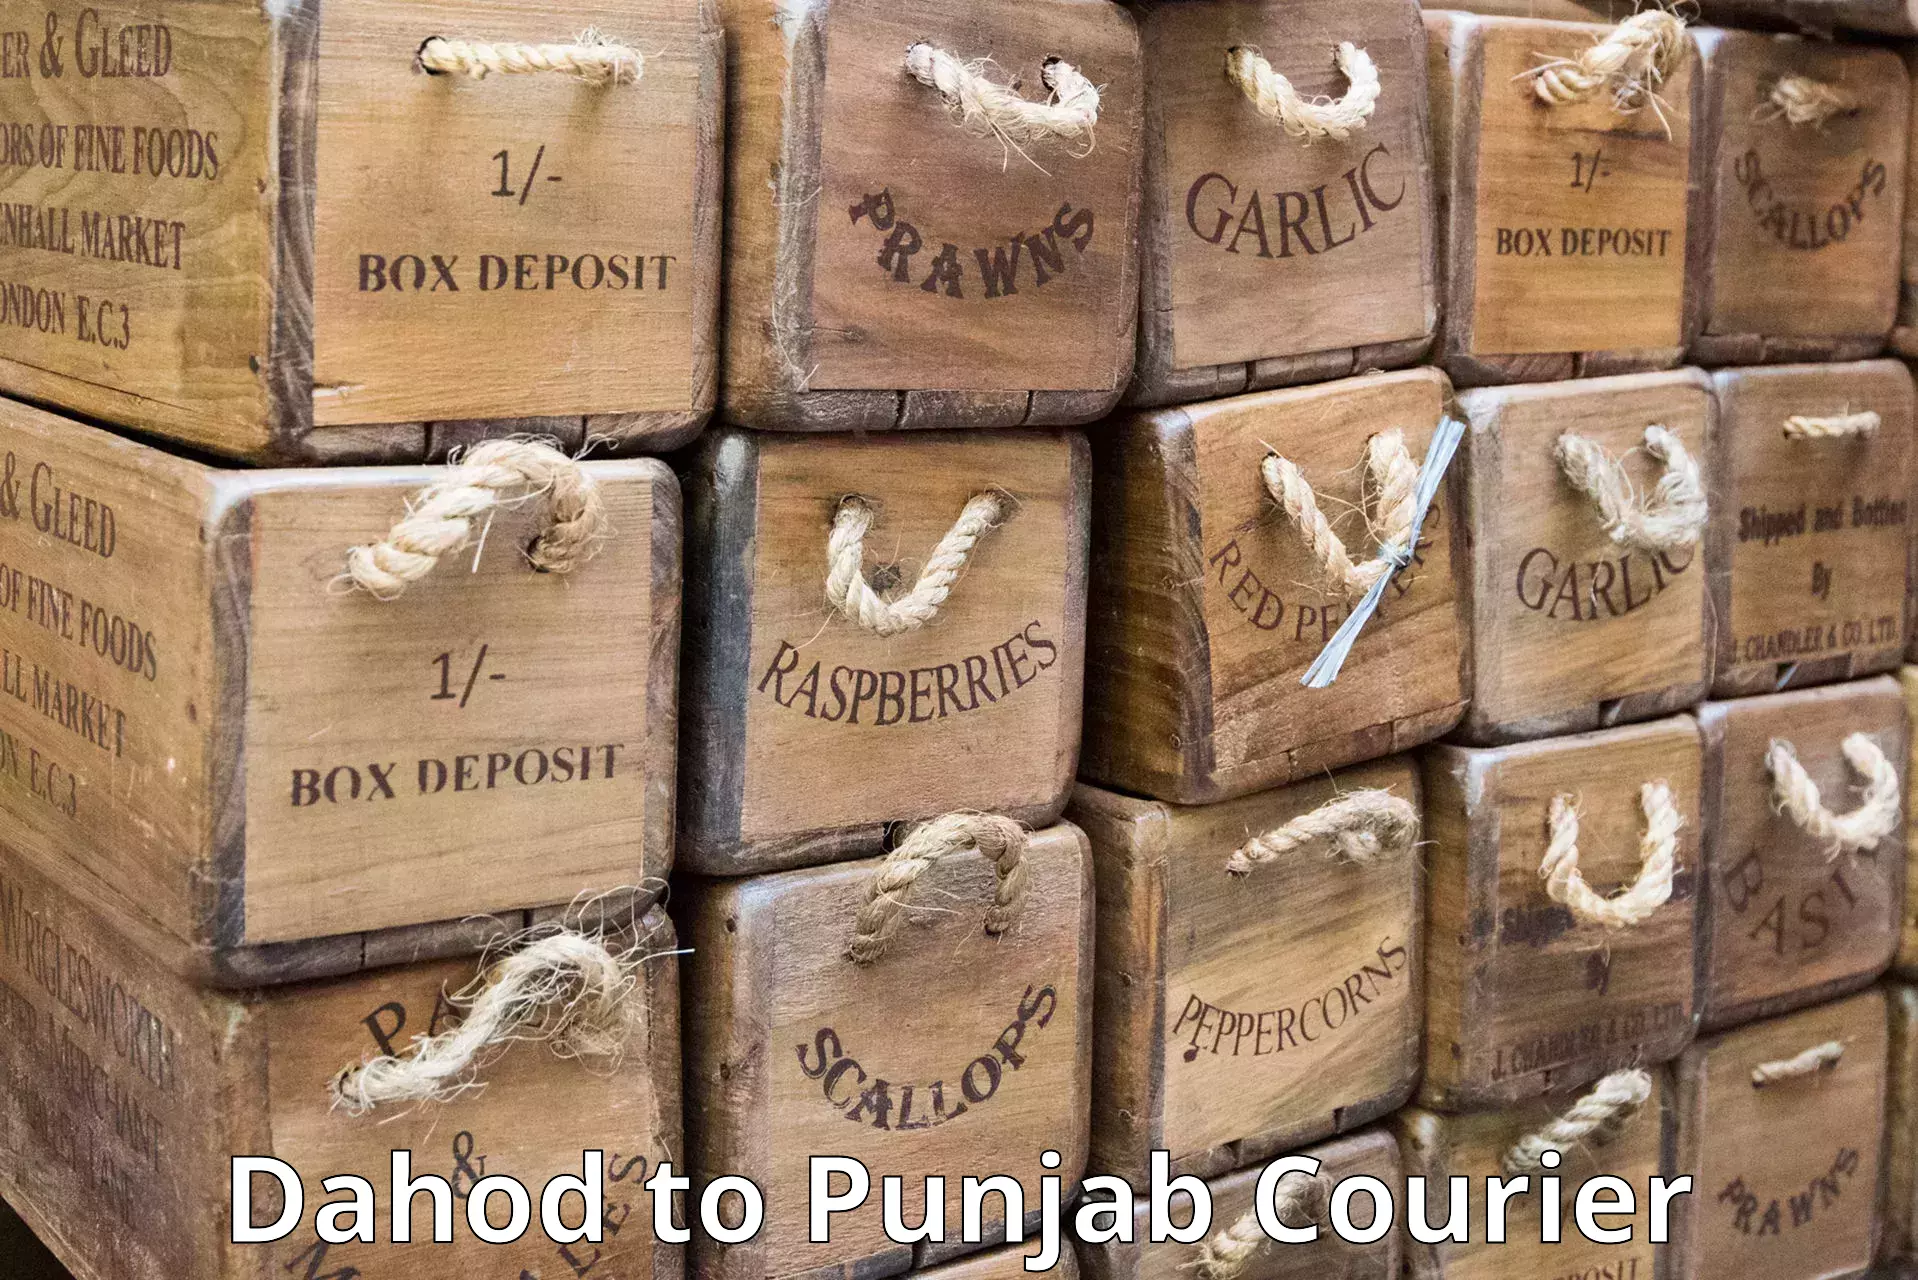 Courier service booking Dahod to Mohali